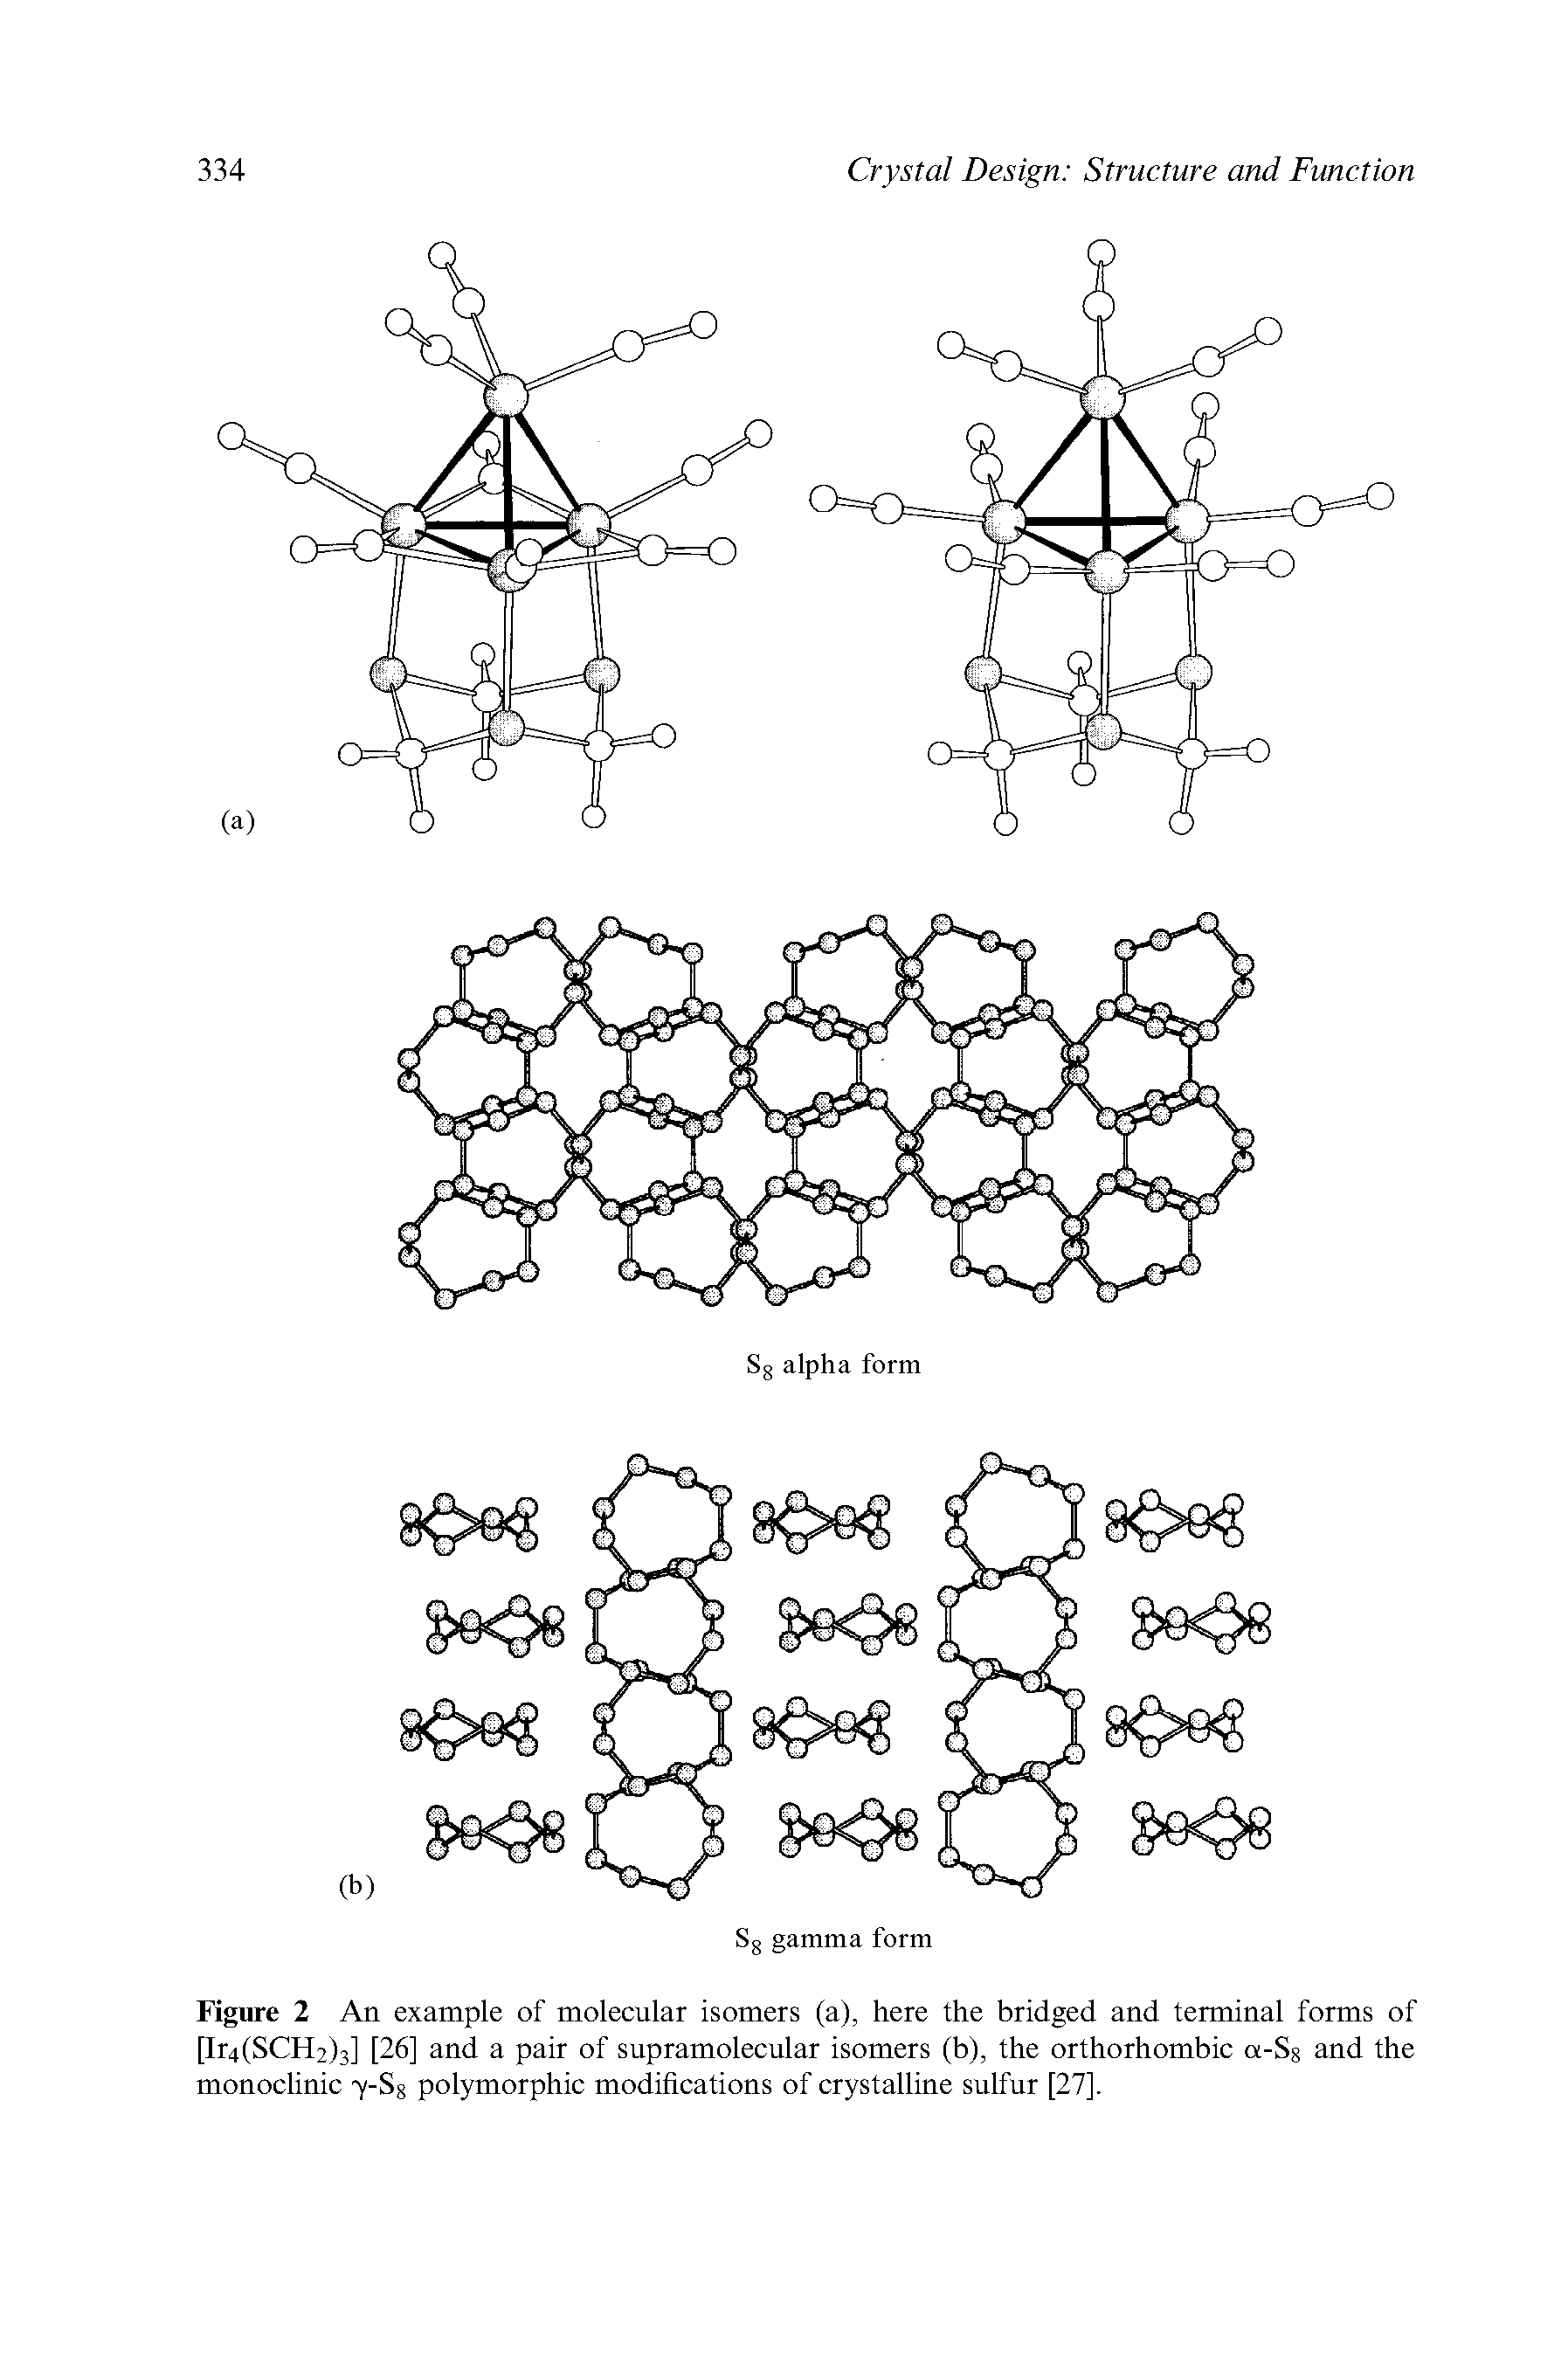 Figure 2 An example of molecular isomers (a), here the bridged and terminal forms of [Ir4(SCH2)3] [26] and a pair of supramolecular isomers (b), the orthorhombic a-Sg and the monoclinic y-Sg polymorphic modifications of crystalline sulfur [27].